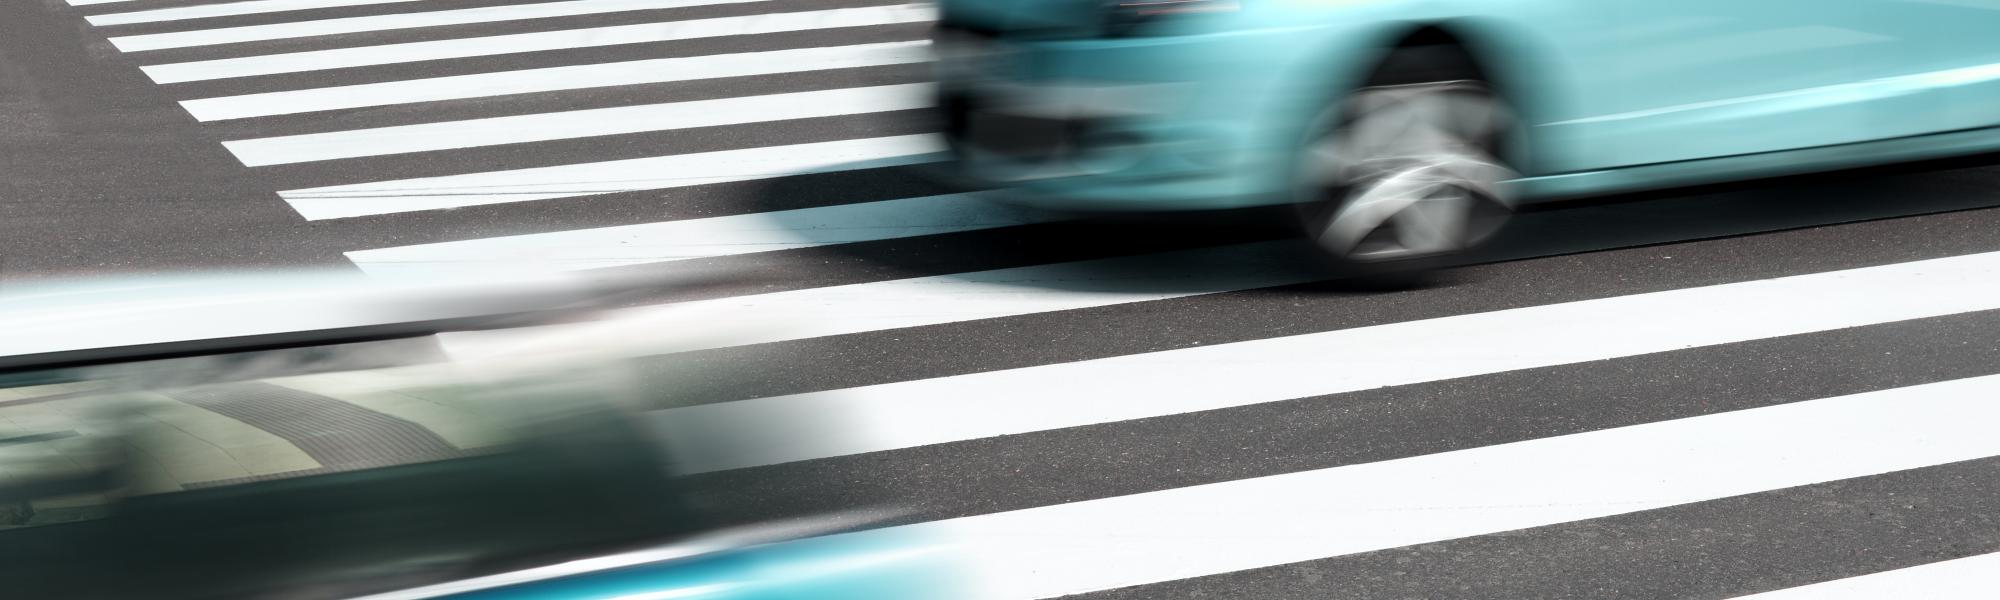 IRU report uncovers barriers to road safety investment